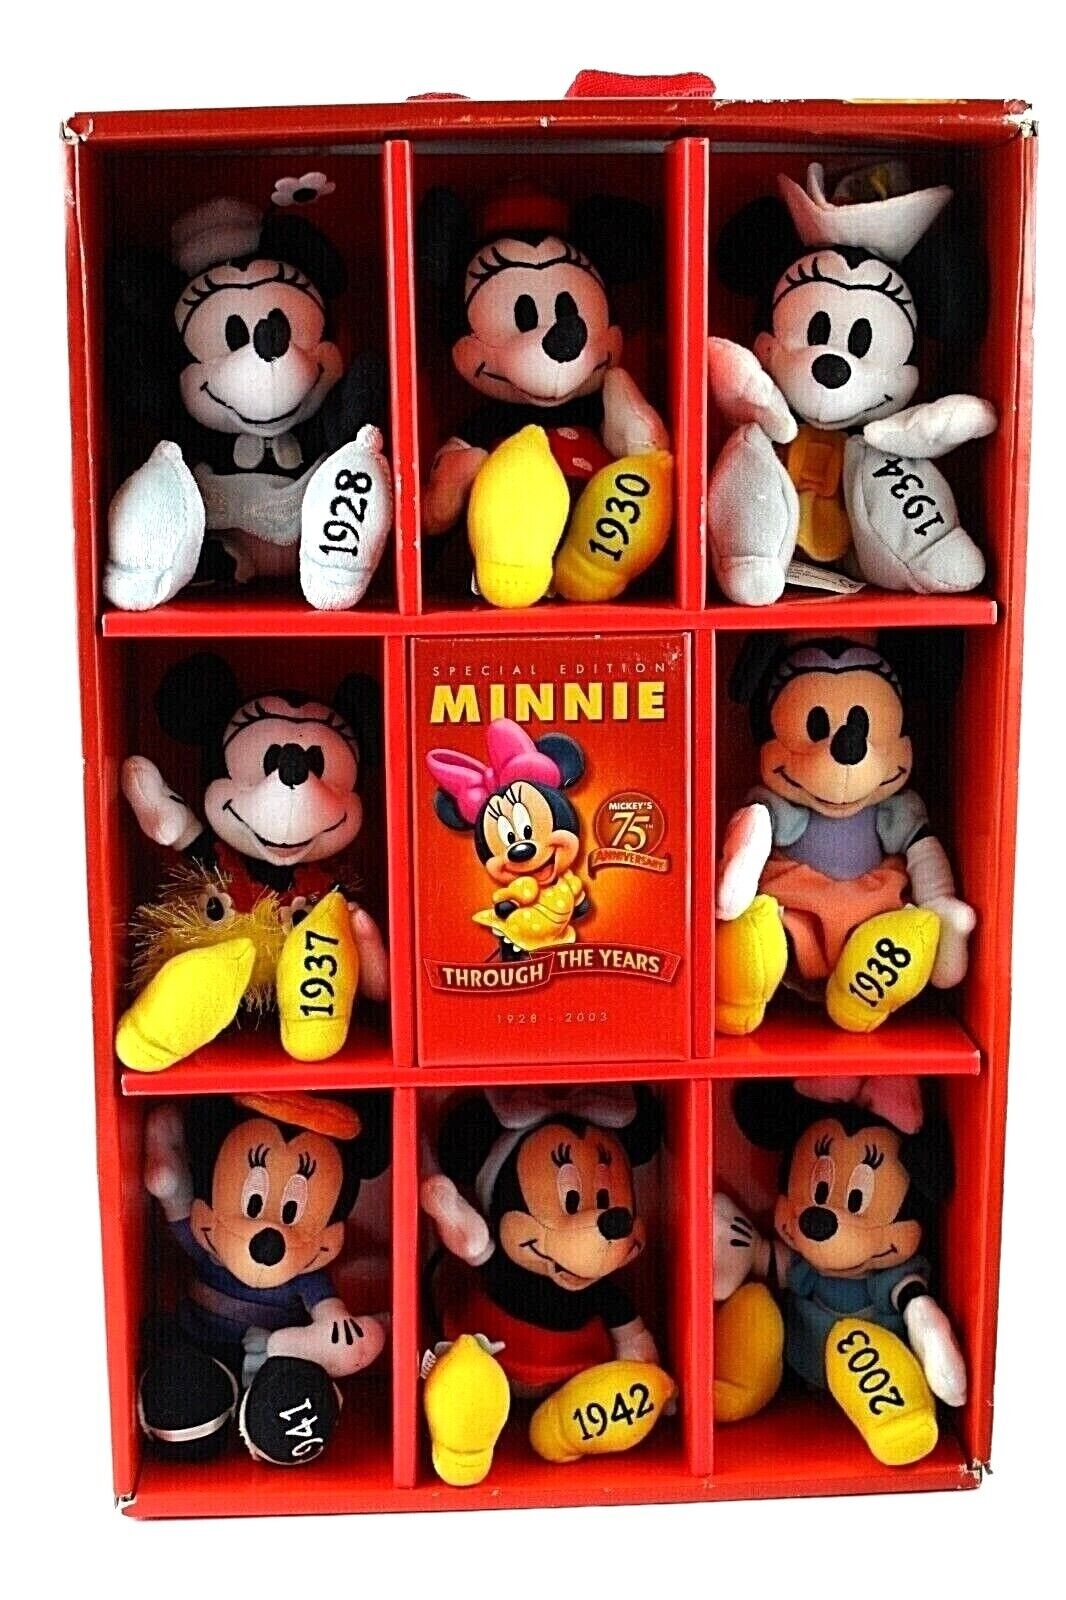 RARE Disney Minnie Mouse Through the Years Plush Special Ed 75th Anniversary